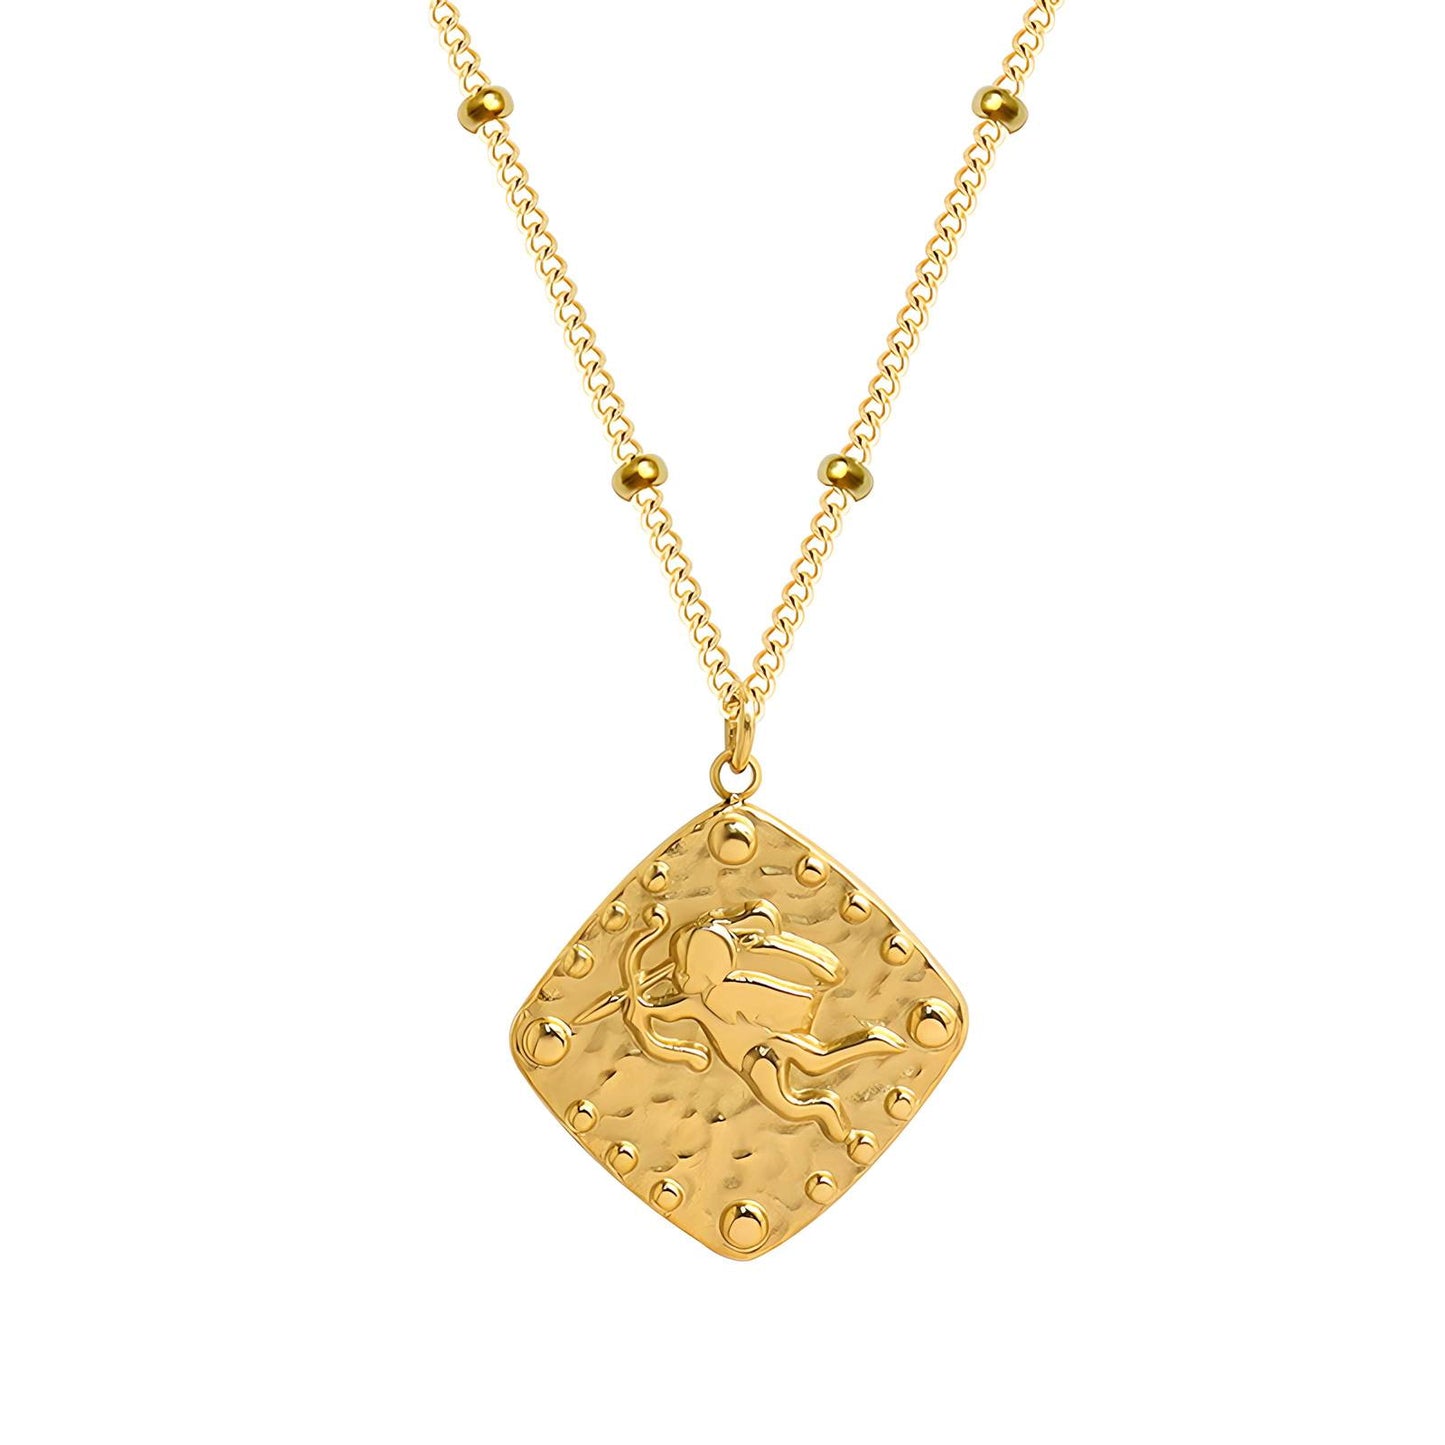 18K gold plated Stainless steel  Сupid necklace